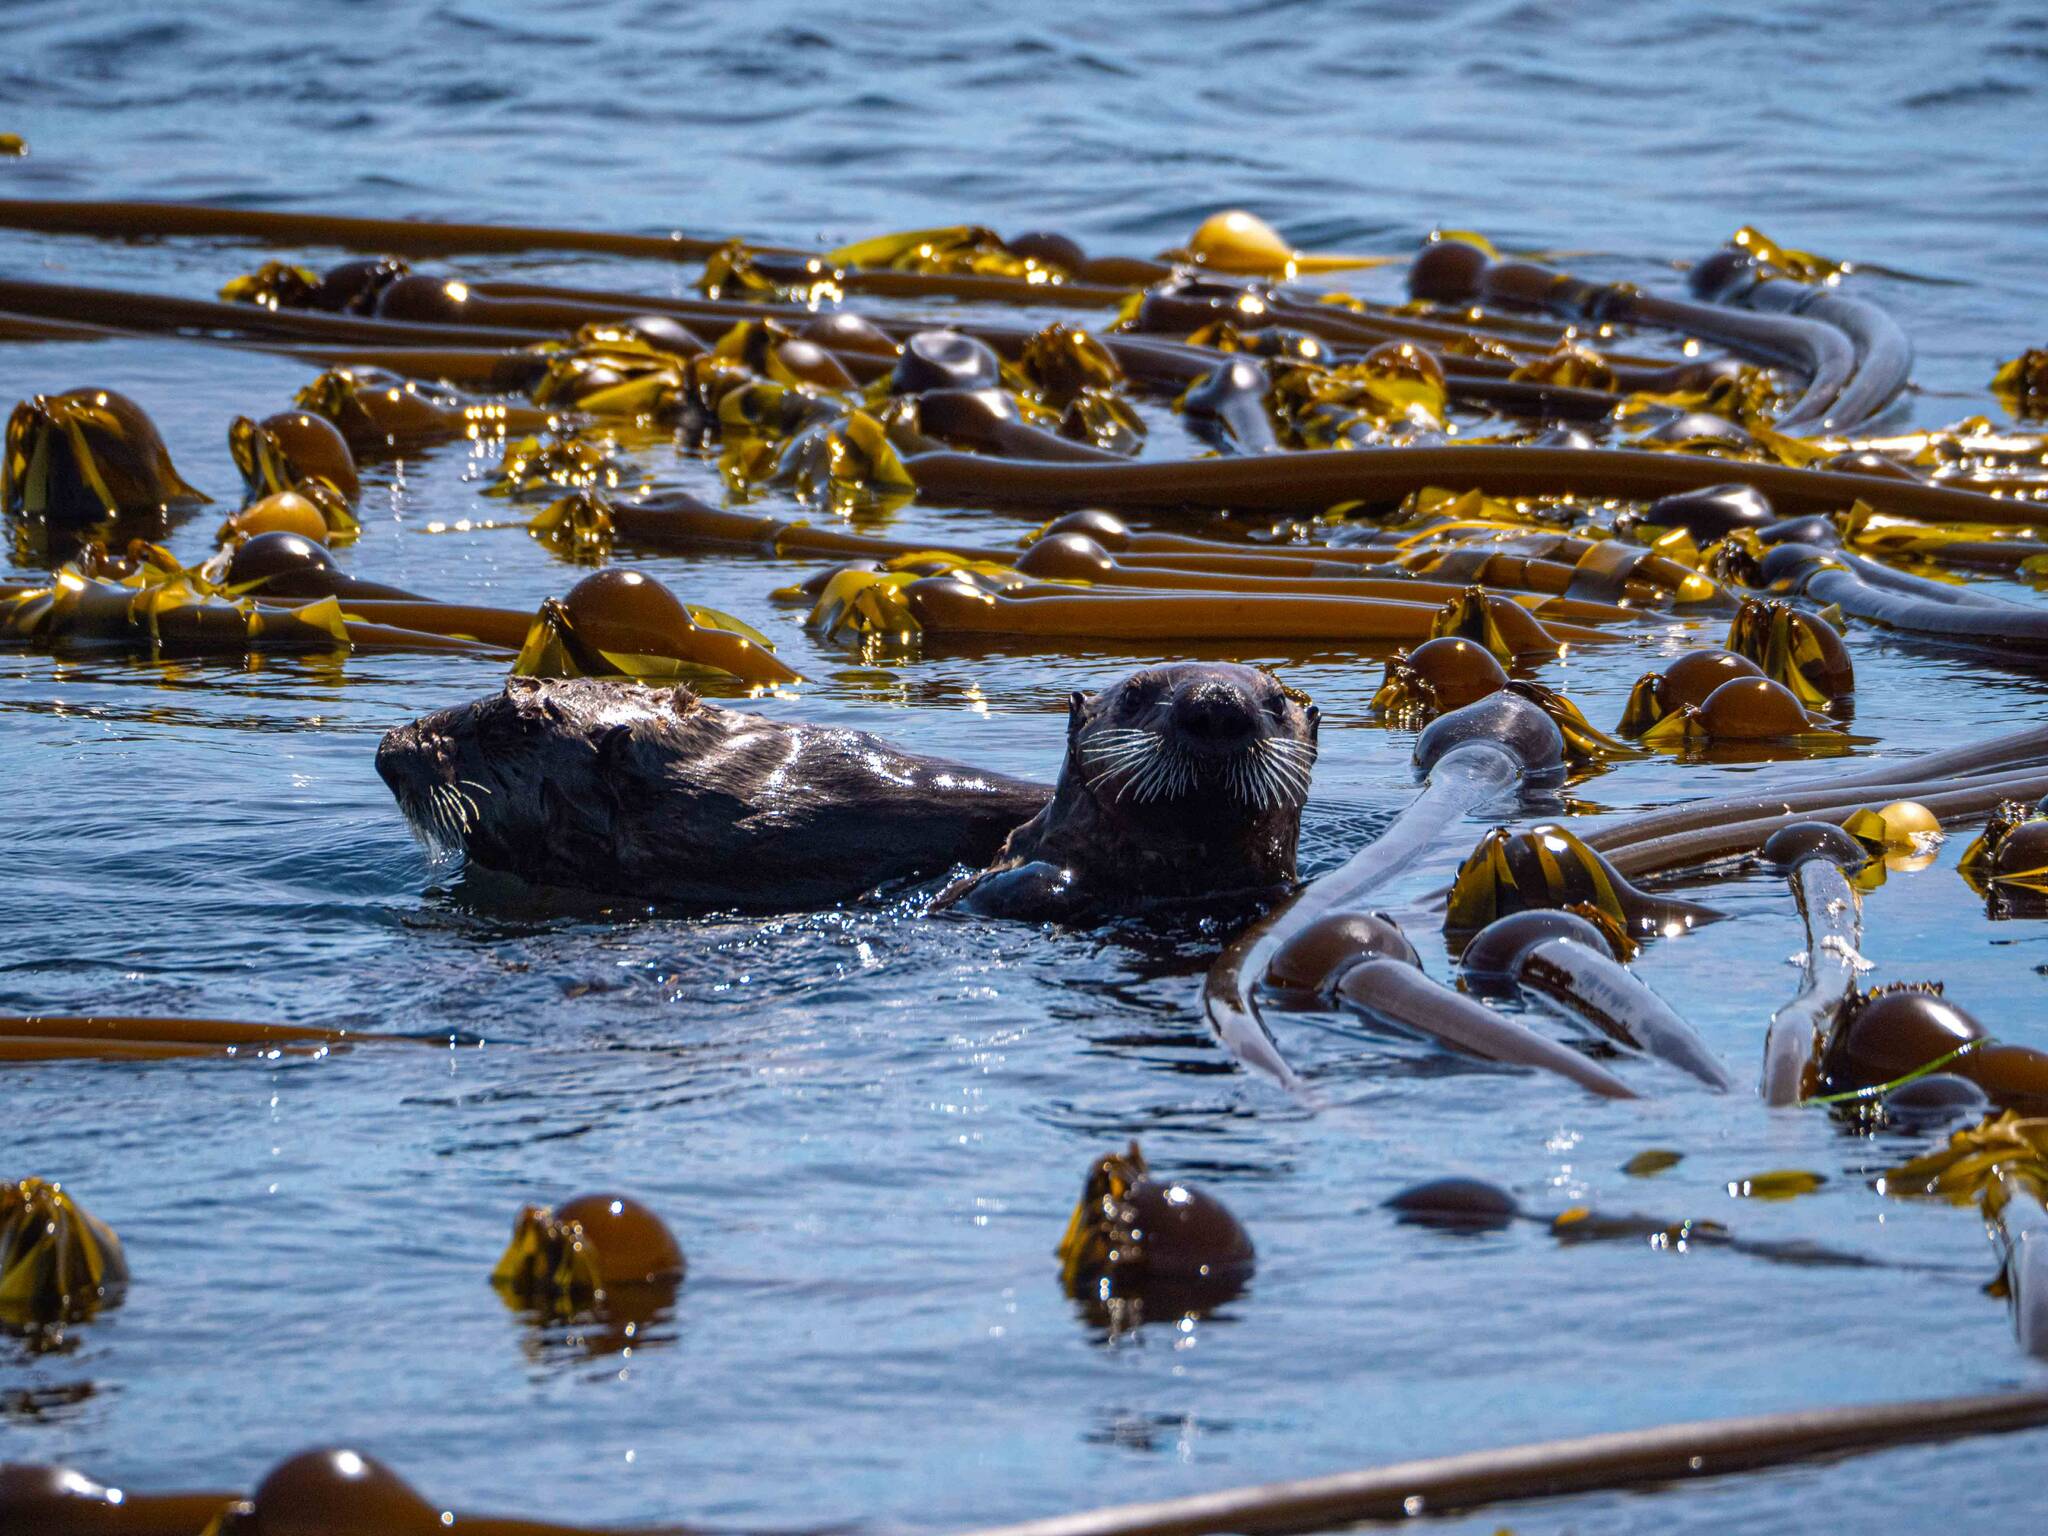 Vancouver Island’s kelp forests have responded in a variety of ways, according to research out of the University of Victoria. Unsplash/contributed photo